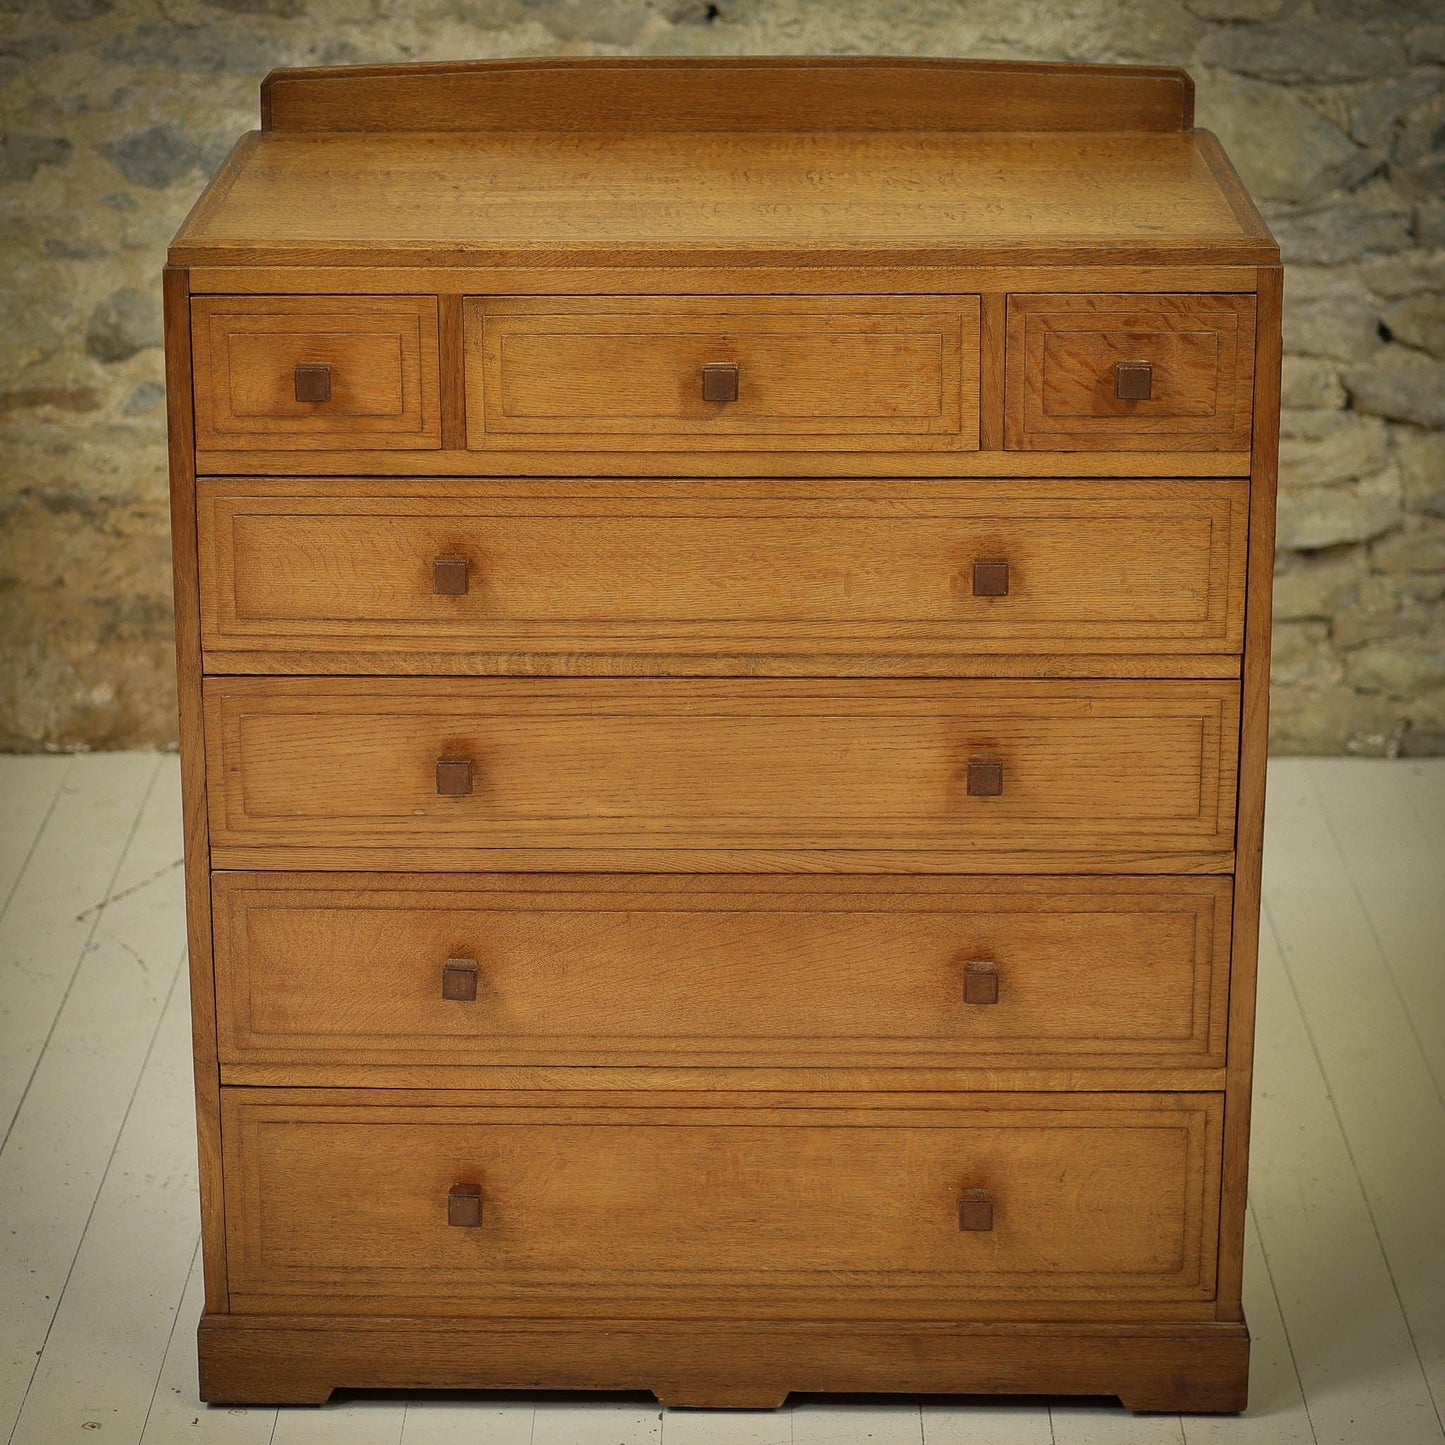 Brynmawr Furniture Co Arts & Crafts Cotswold School Oak Chest of Drawers c. 1930